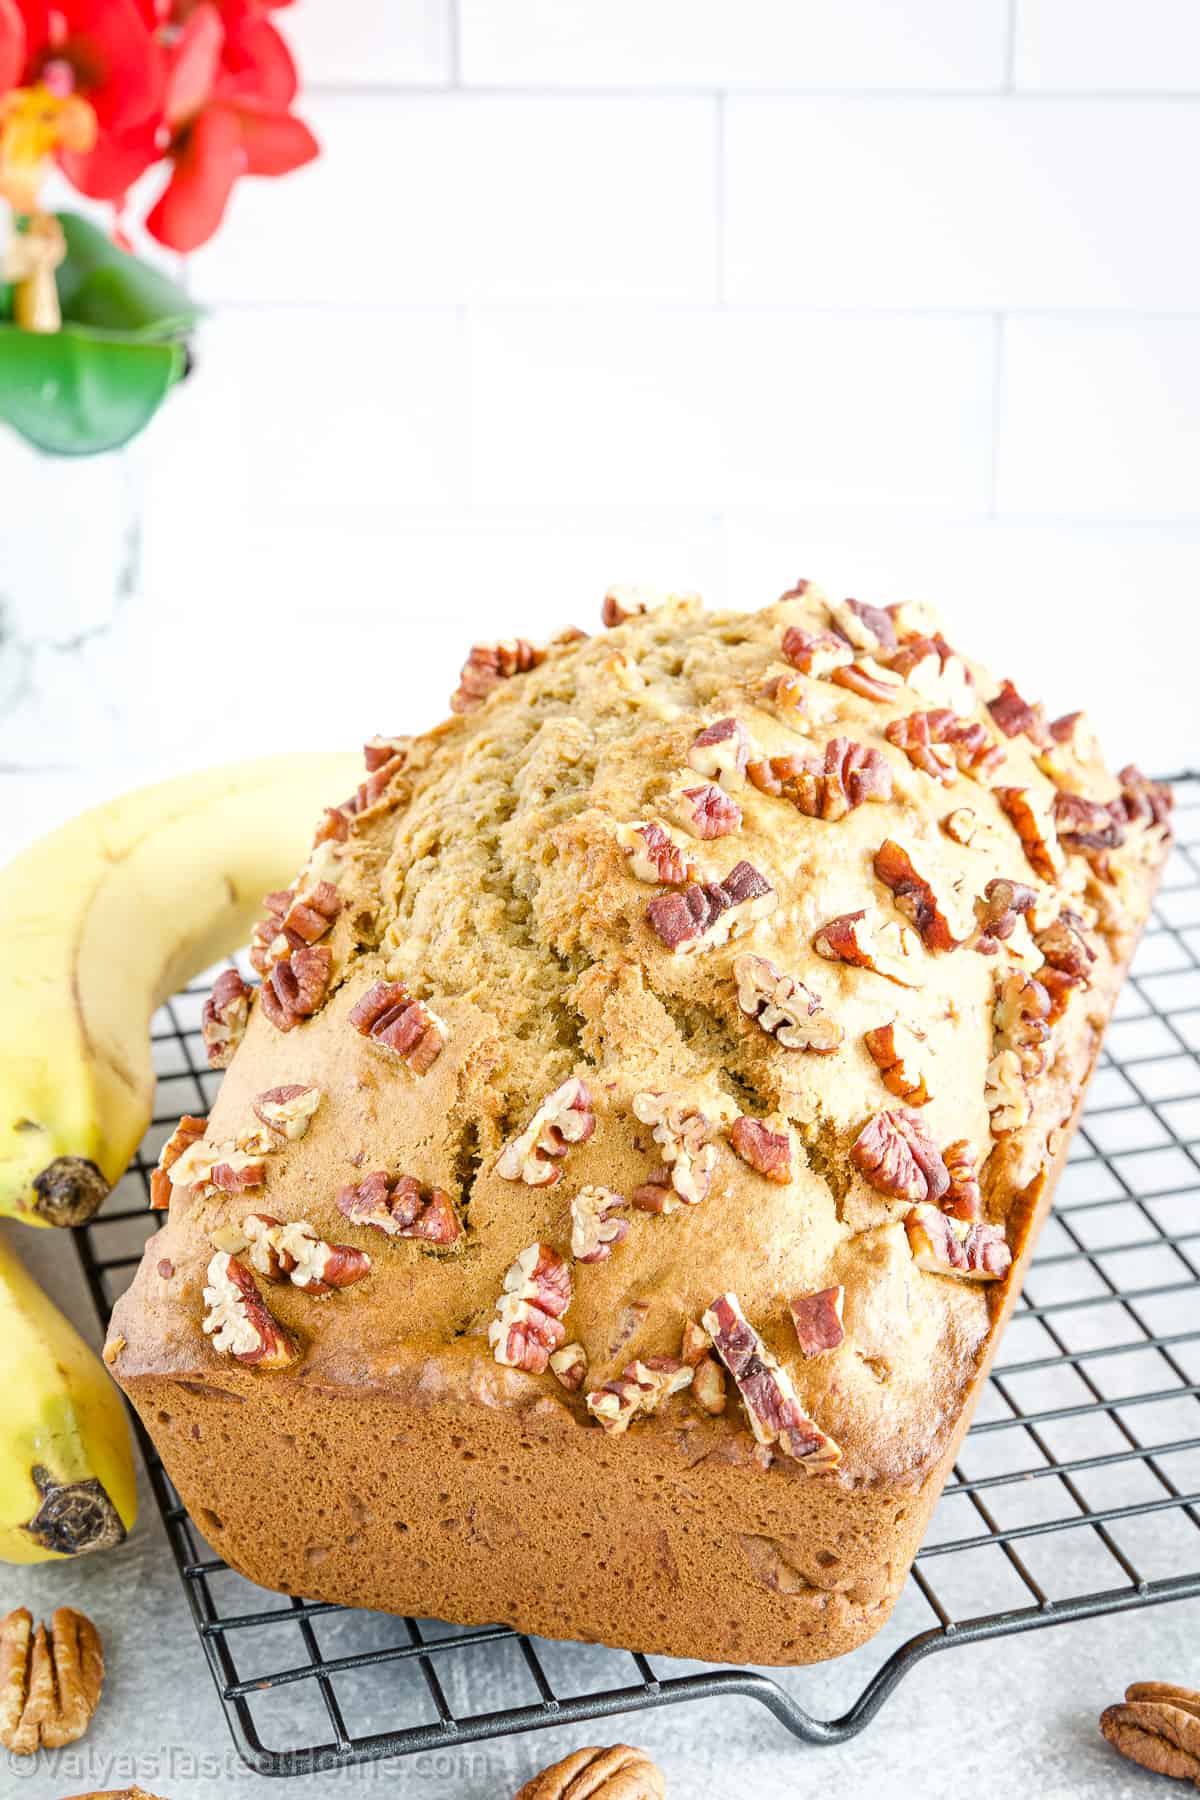 If you're a fan of quick and easy baked goods that are both delicious and nutritious, then you're going to love banana pecan bread!